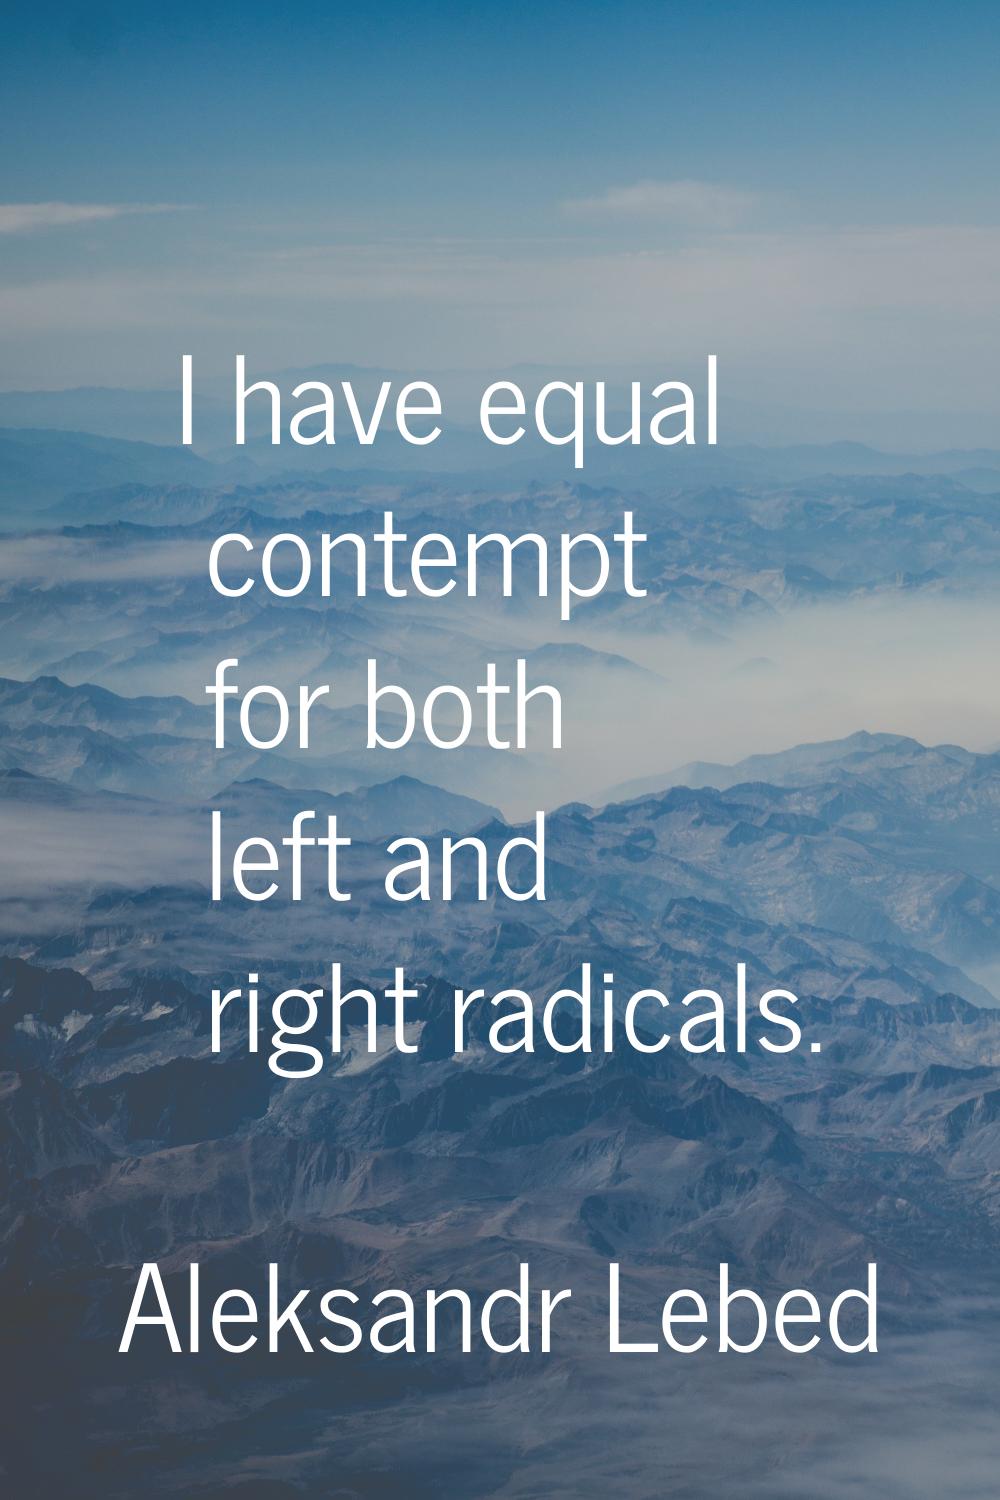 I have equal contempt for both left and right radicals.